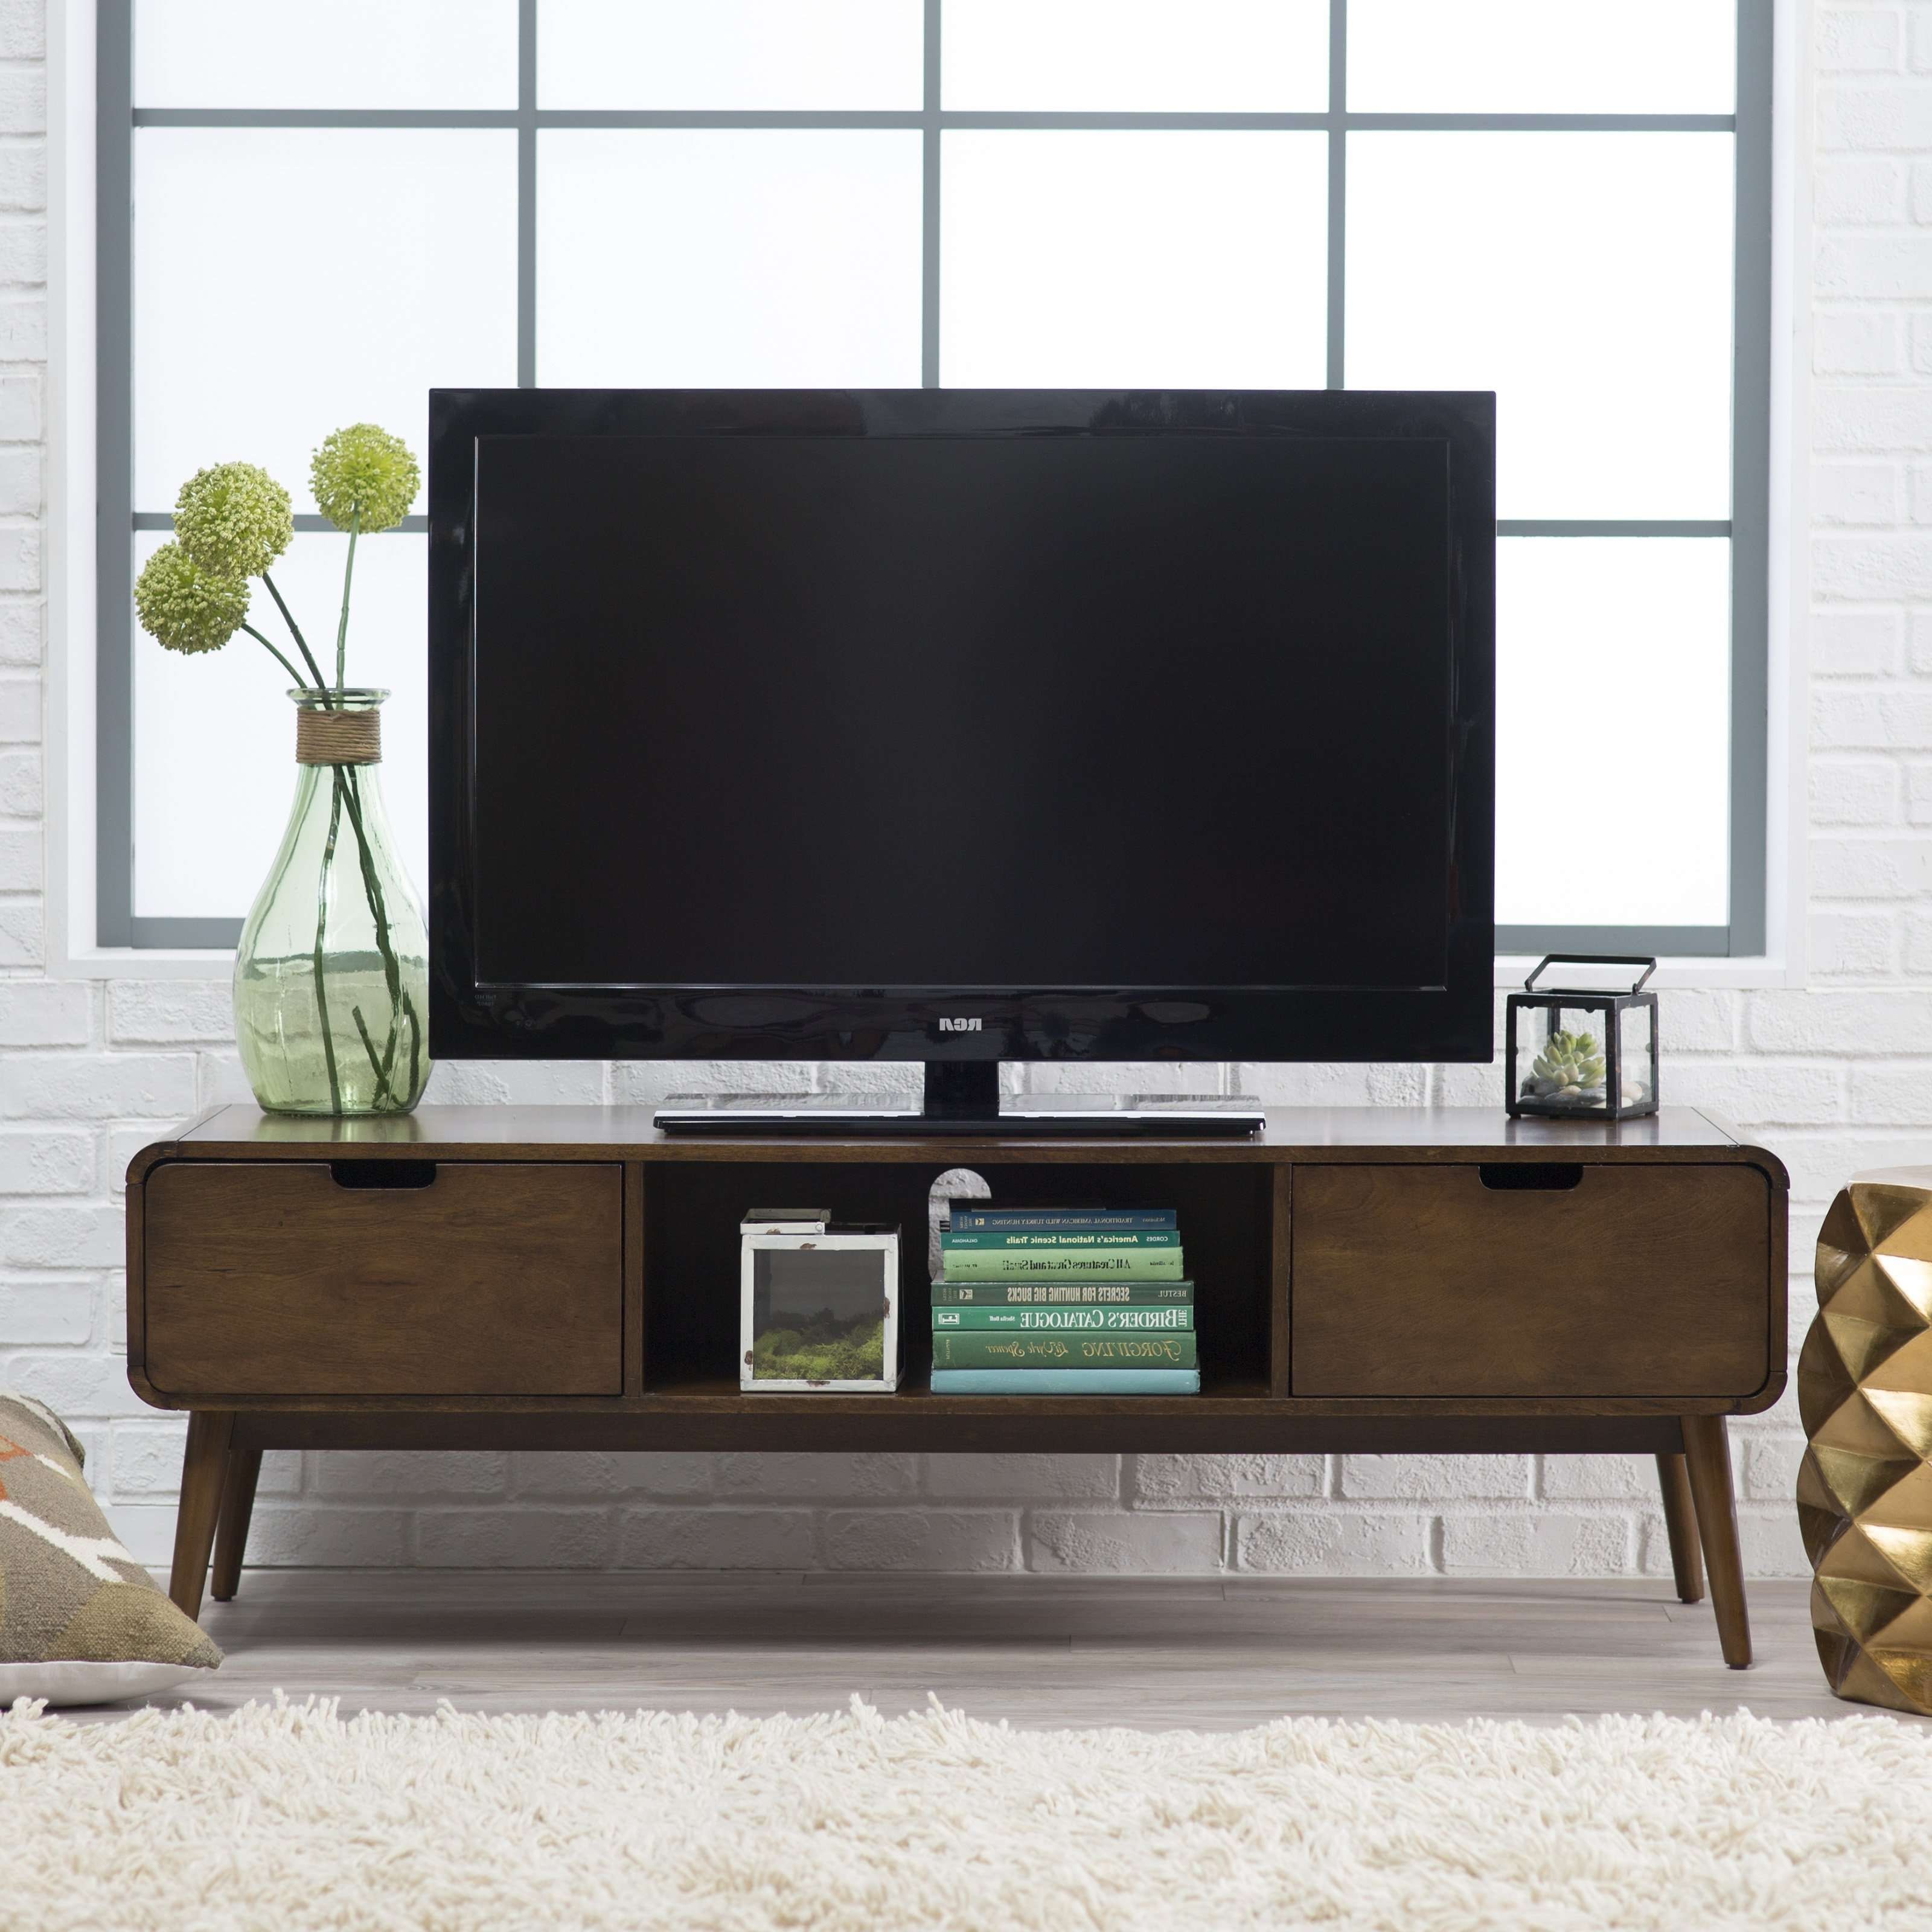 Howling Carter Tv Stand Tv Stands Entertainment Centers All To Throughout Modern Low Tv Stands (View 13 of 20)